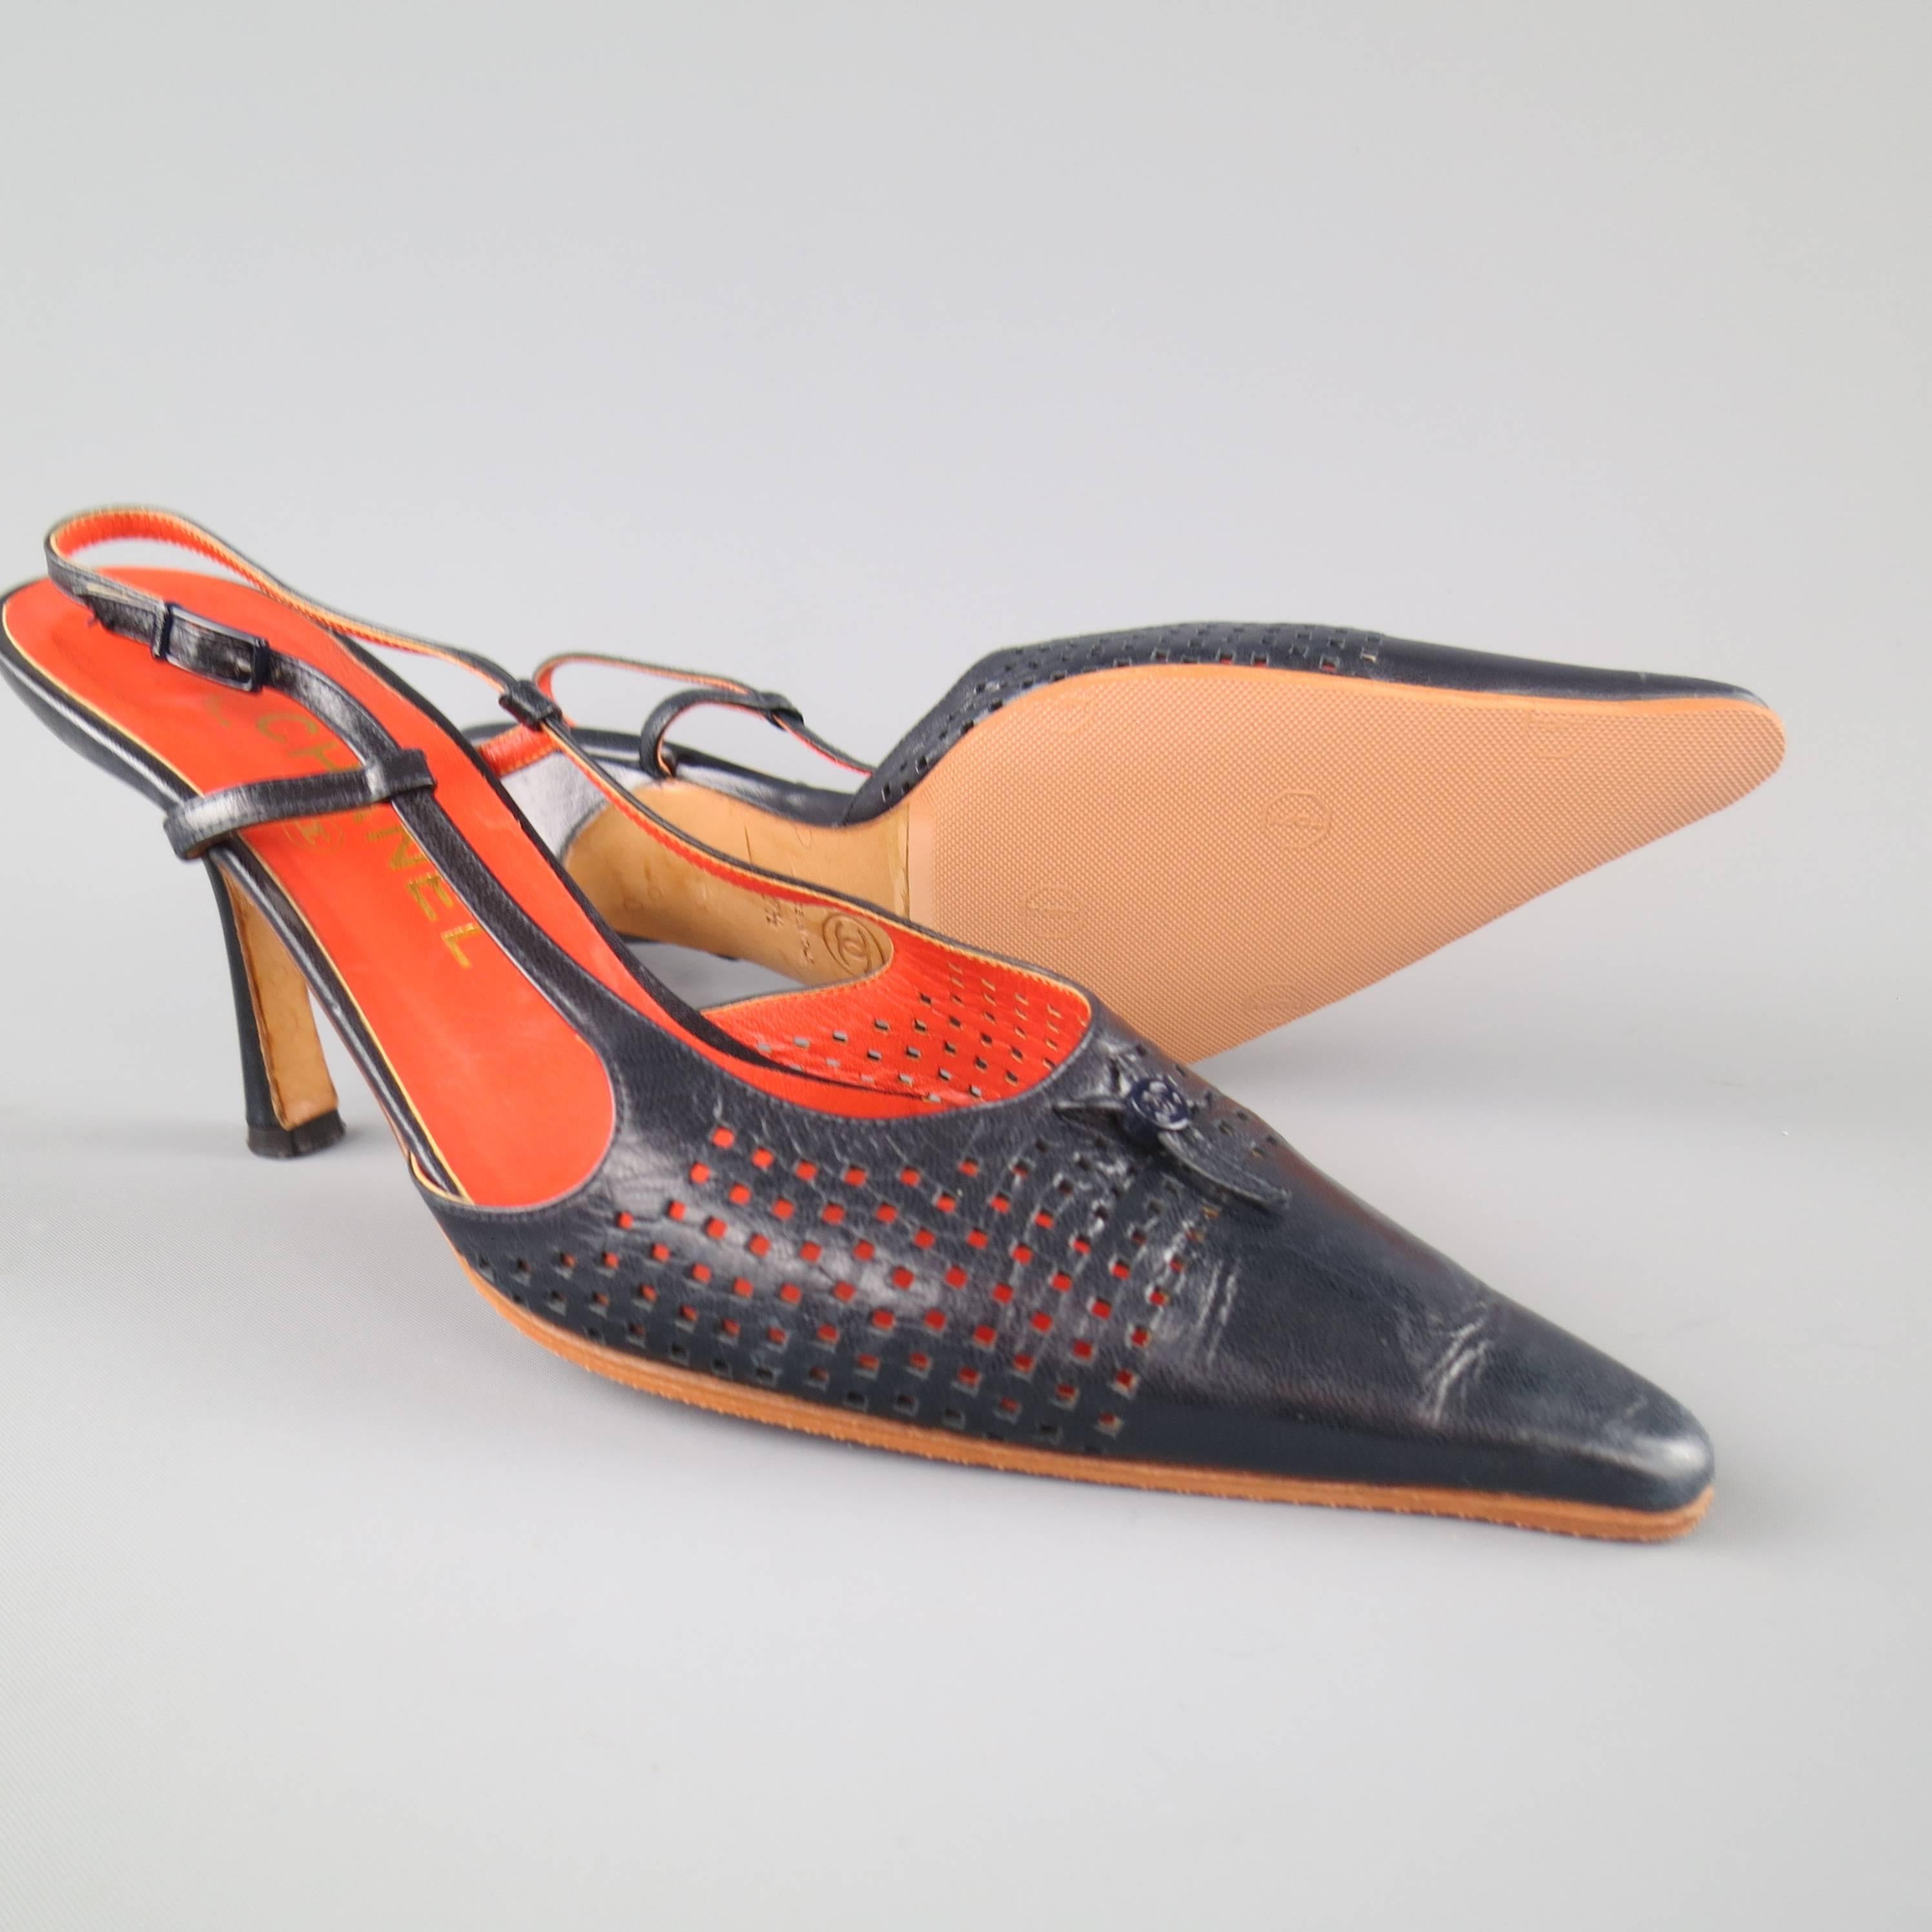 Vintage CHANEL slingback pumps in navy blue leather featuring a pointed toe with perforated cutouts and emblem detail, red interior, and covered stiletto heel. With box. Made in Italy.
 
Good Pre-Owned Condition.
Marked: IT 37.5
 
Heel: 3.5